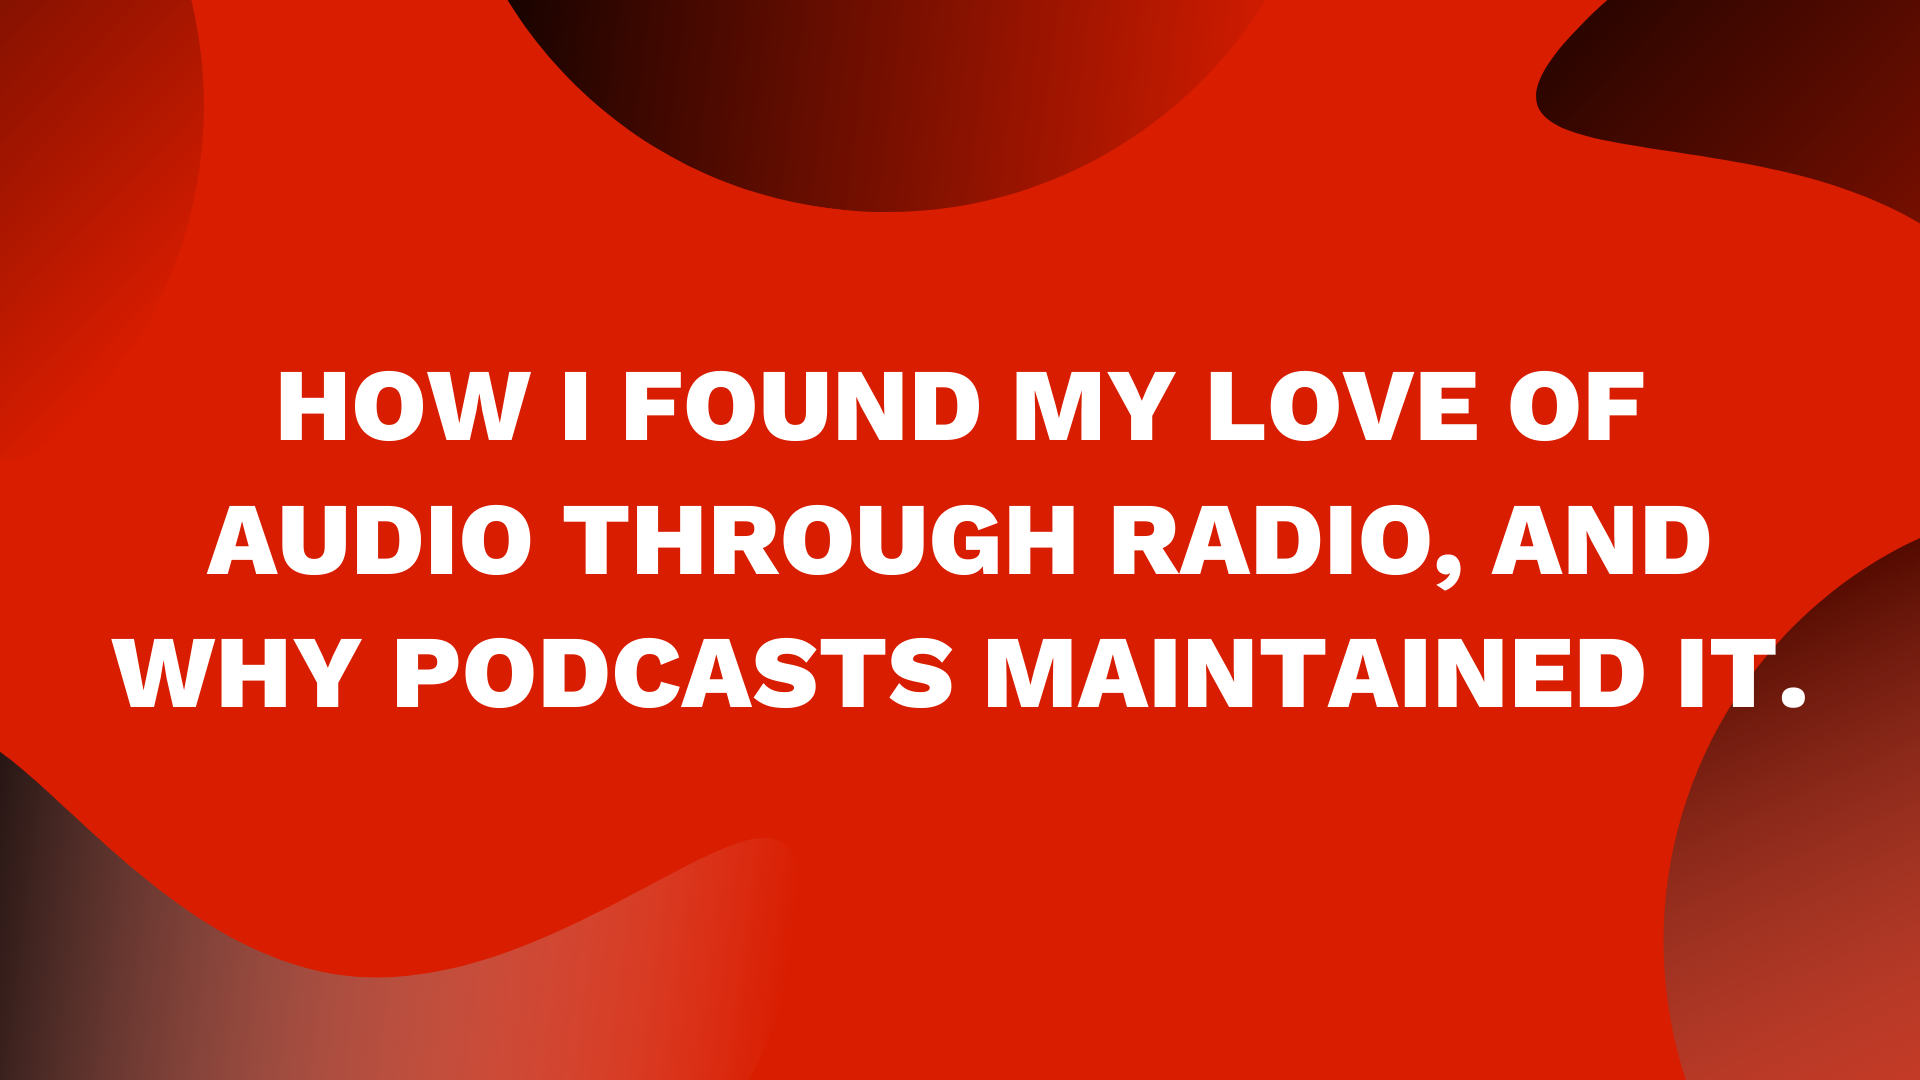 World Radio Day. My first love? The voice out of the box. Until I found the pre-record button. How I found my love of audio through radio and why podcasts maintained it